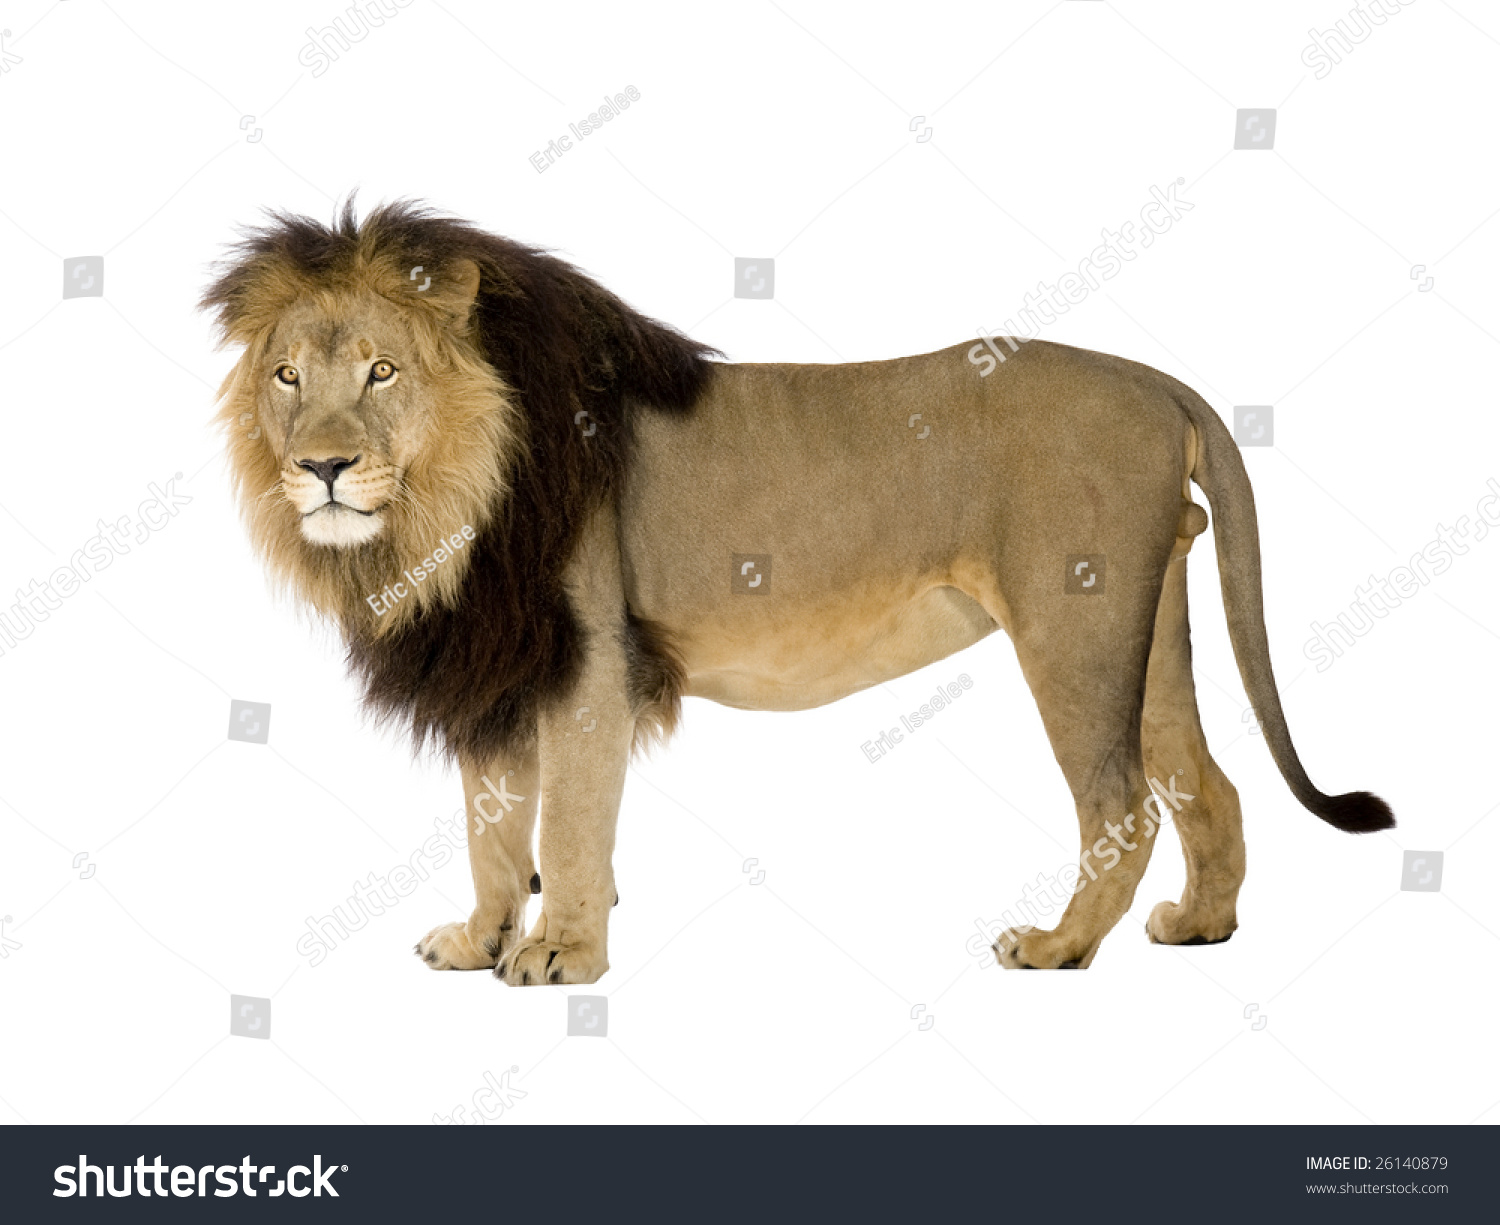 Lion And A Half Years Panthera Leo In Front Of